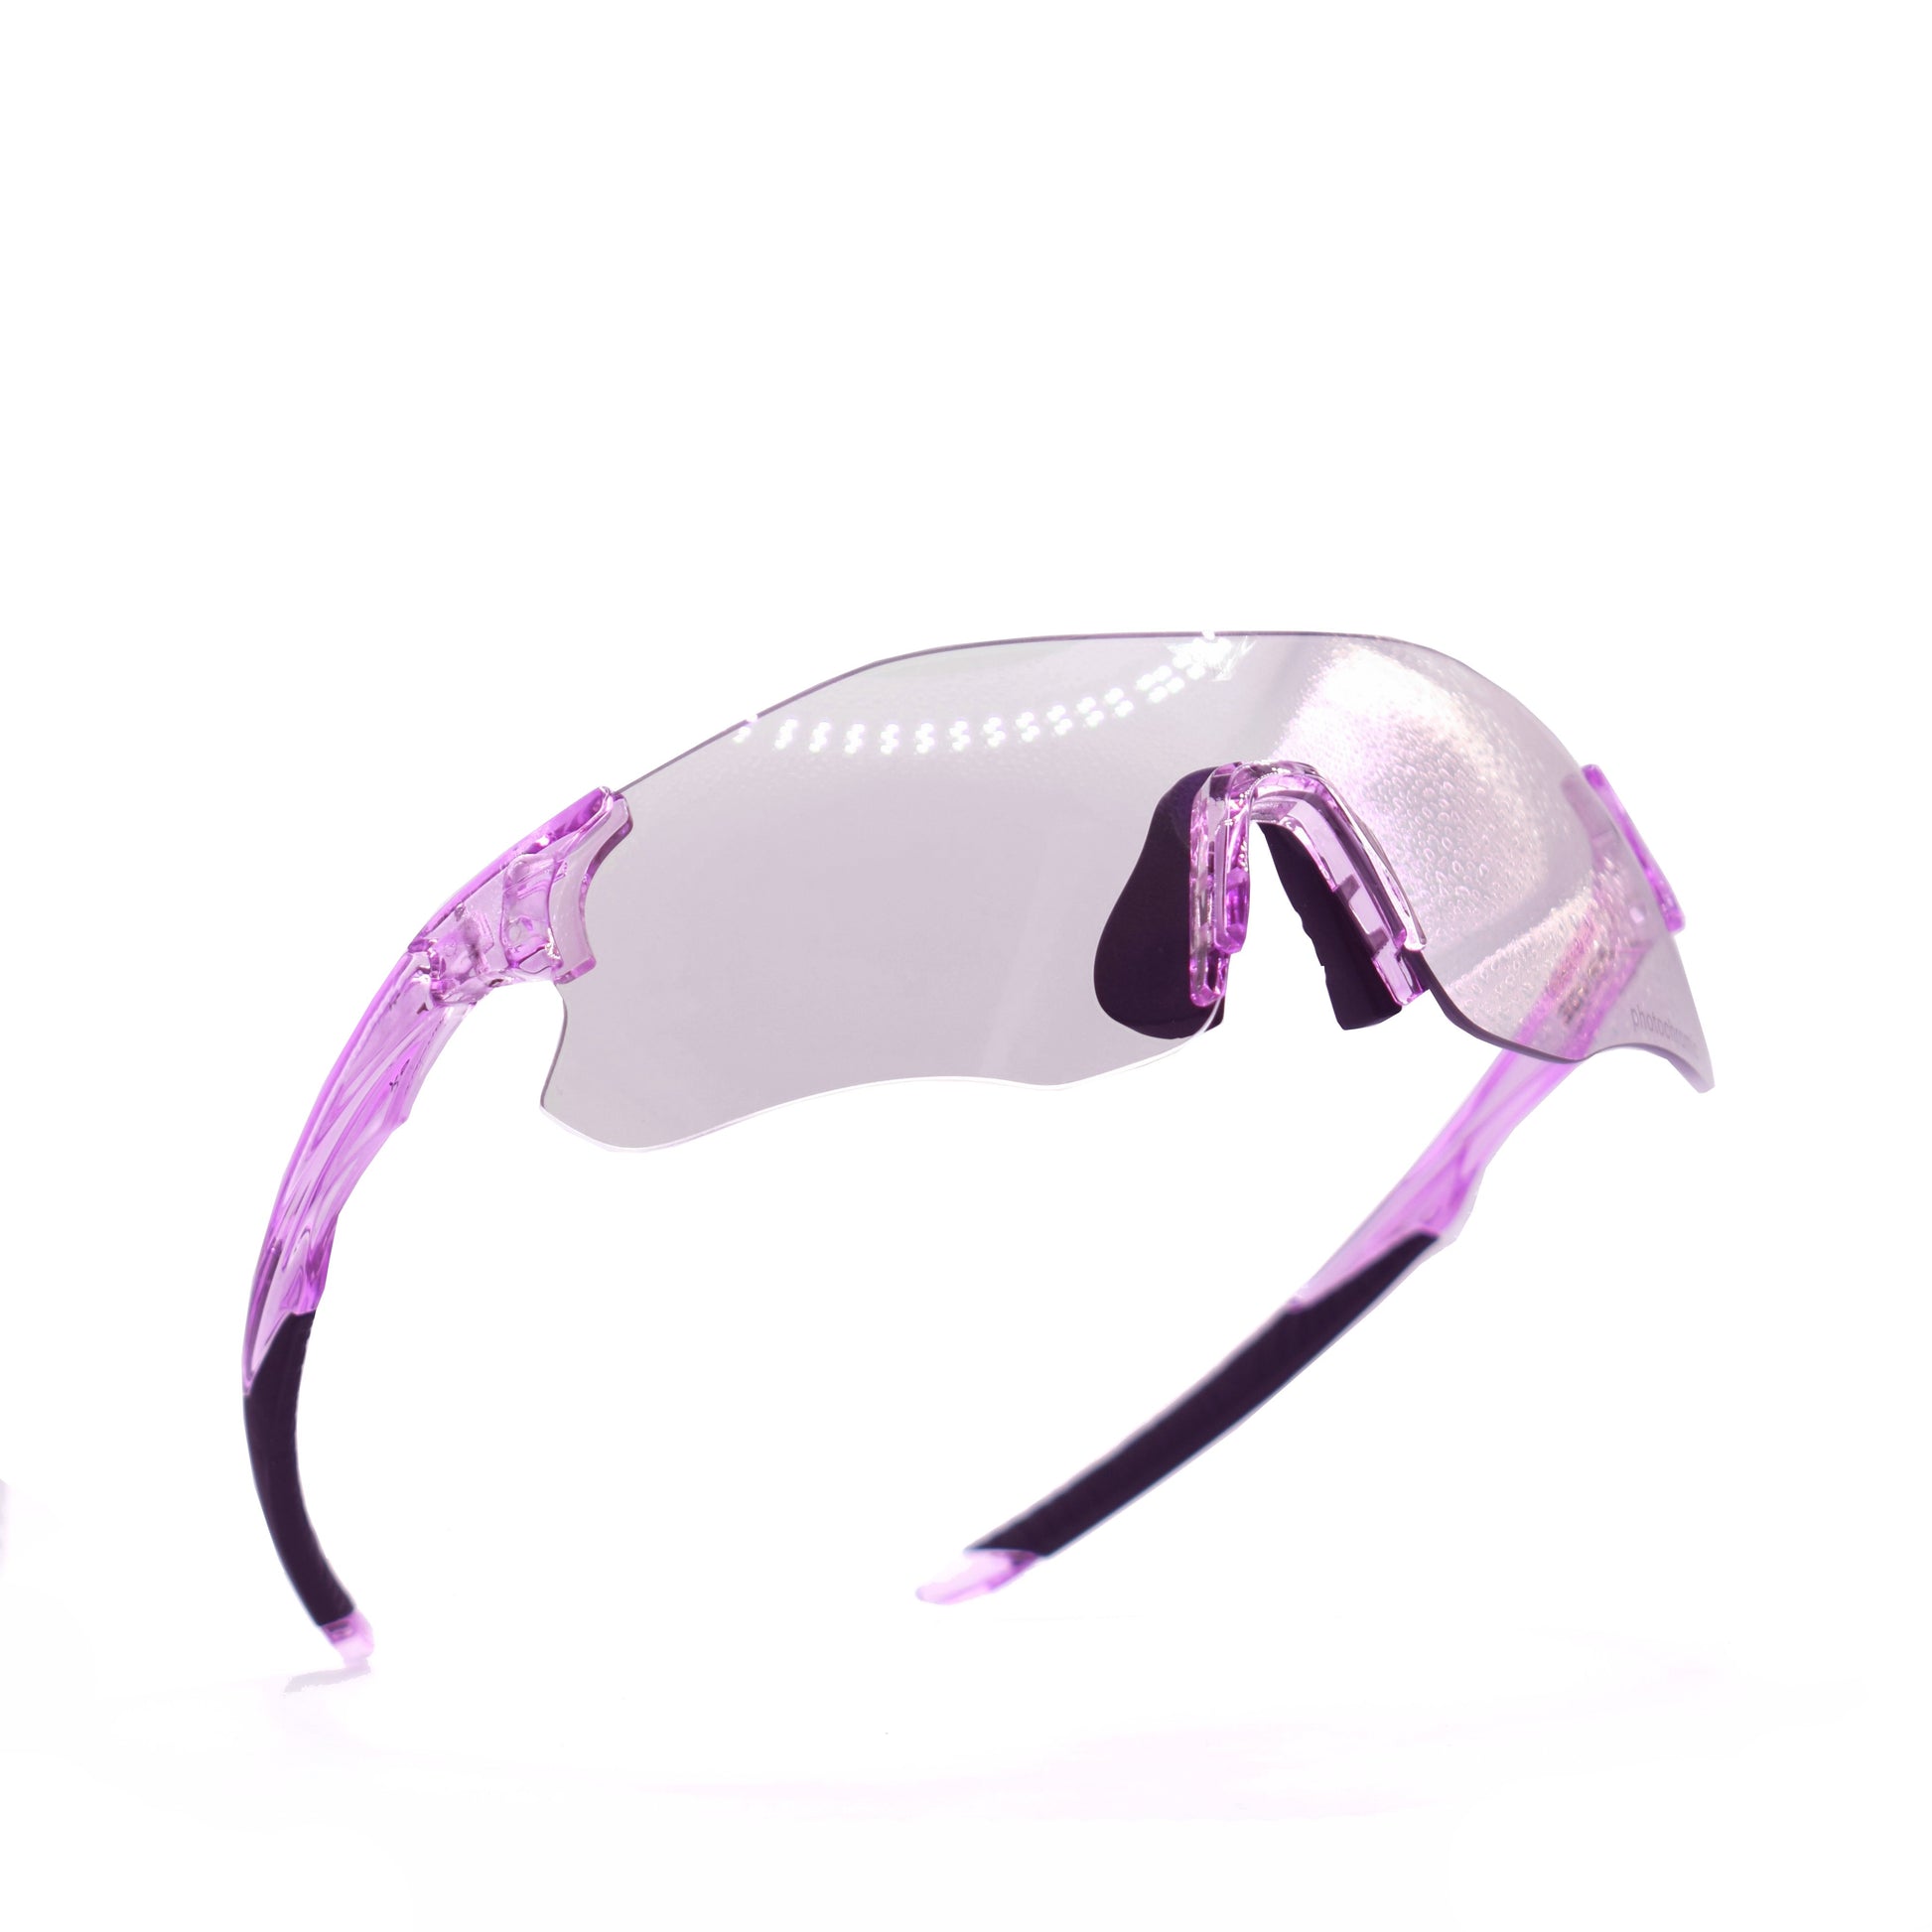 Flamingo Woman Cycling Glasses - Perspective transparent